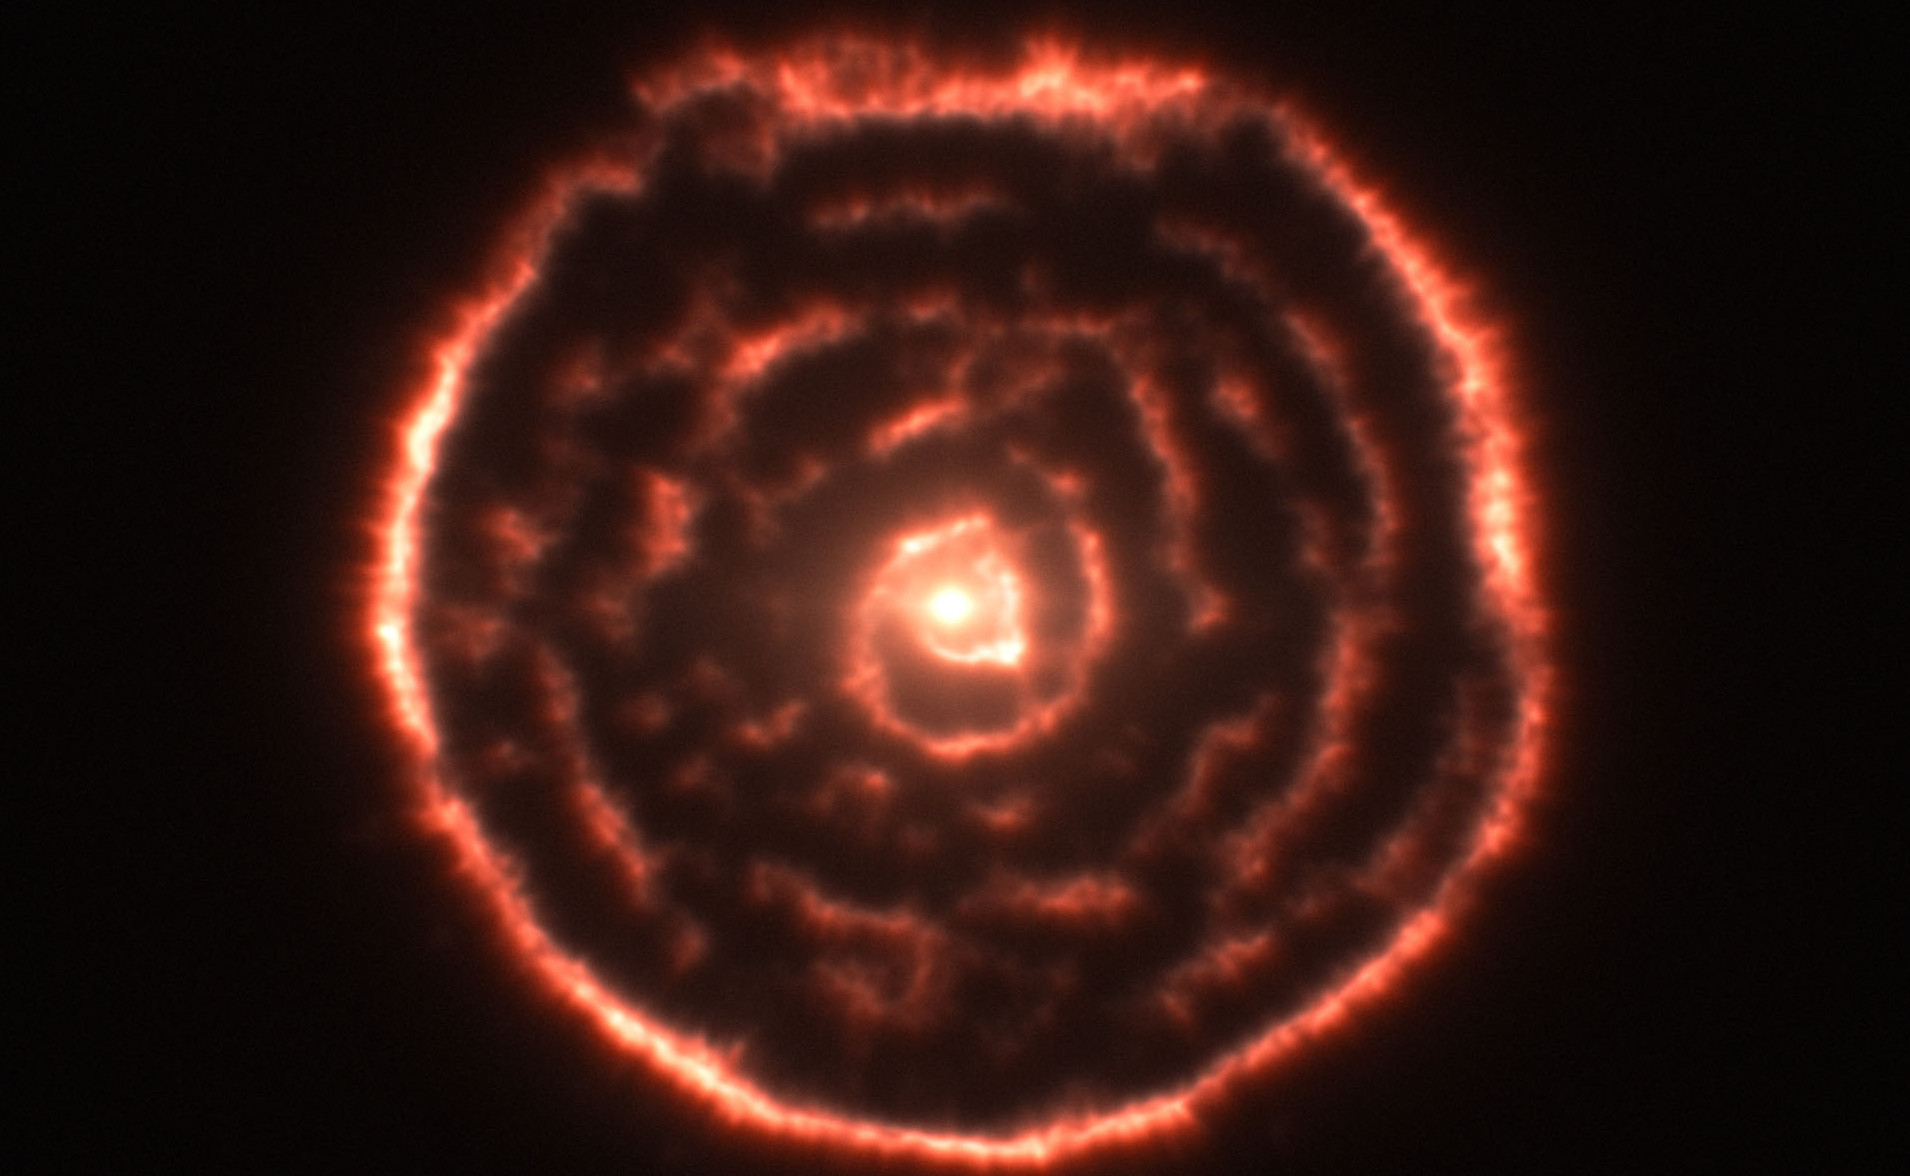 Observations using the Atacama Large Millimeter/submillimeter Array (ALMA) have revealed an unexpected spiral structure in the material around the old star R Sculptoris. This feature has never been seen before and is probably caused by a hidden companion star orbiting the star. This slice through the new ALMA data reveals the shell around the star, which shows up as the outer circular ring, as well as a very clear spiral structure in the inner material.